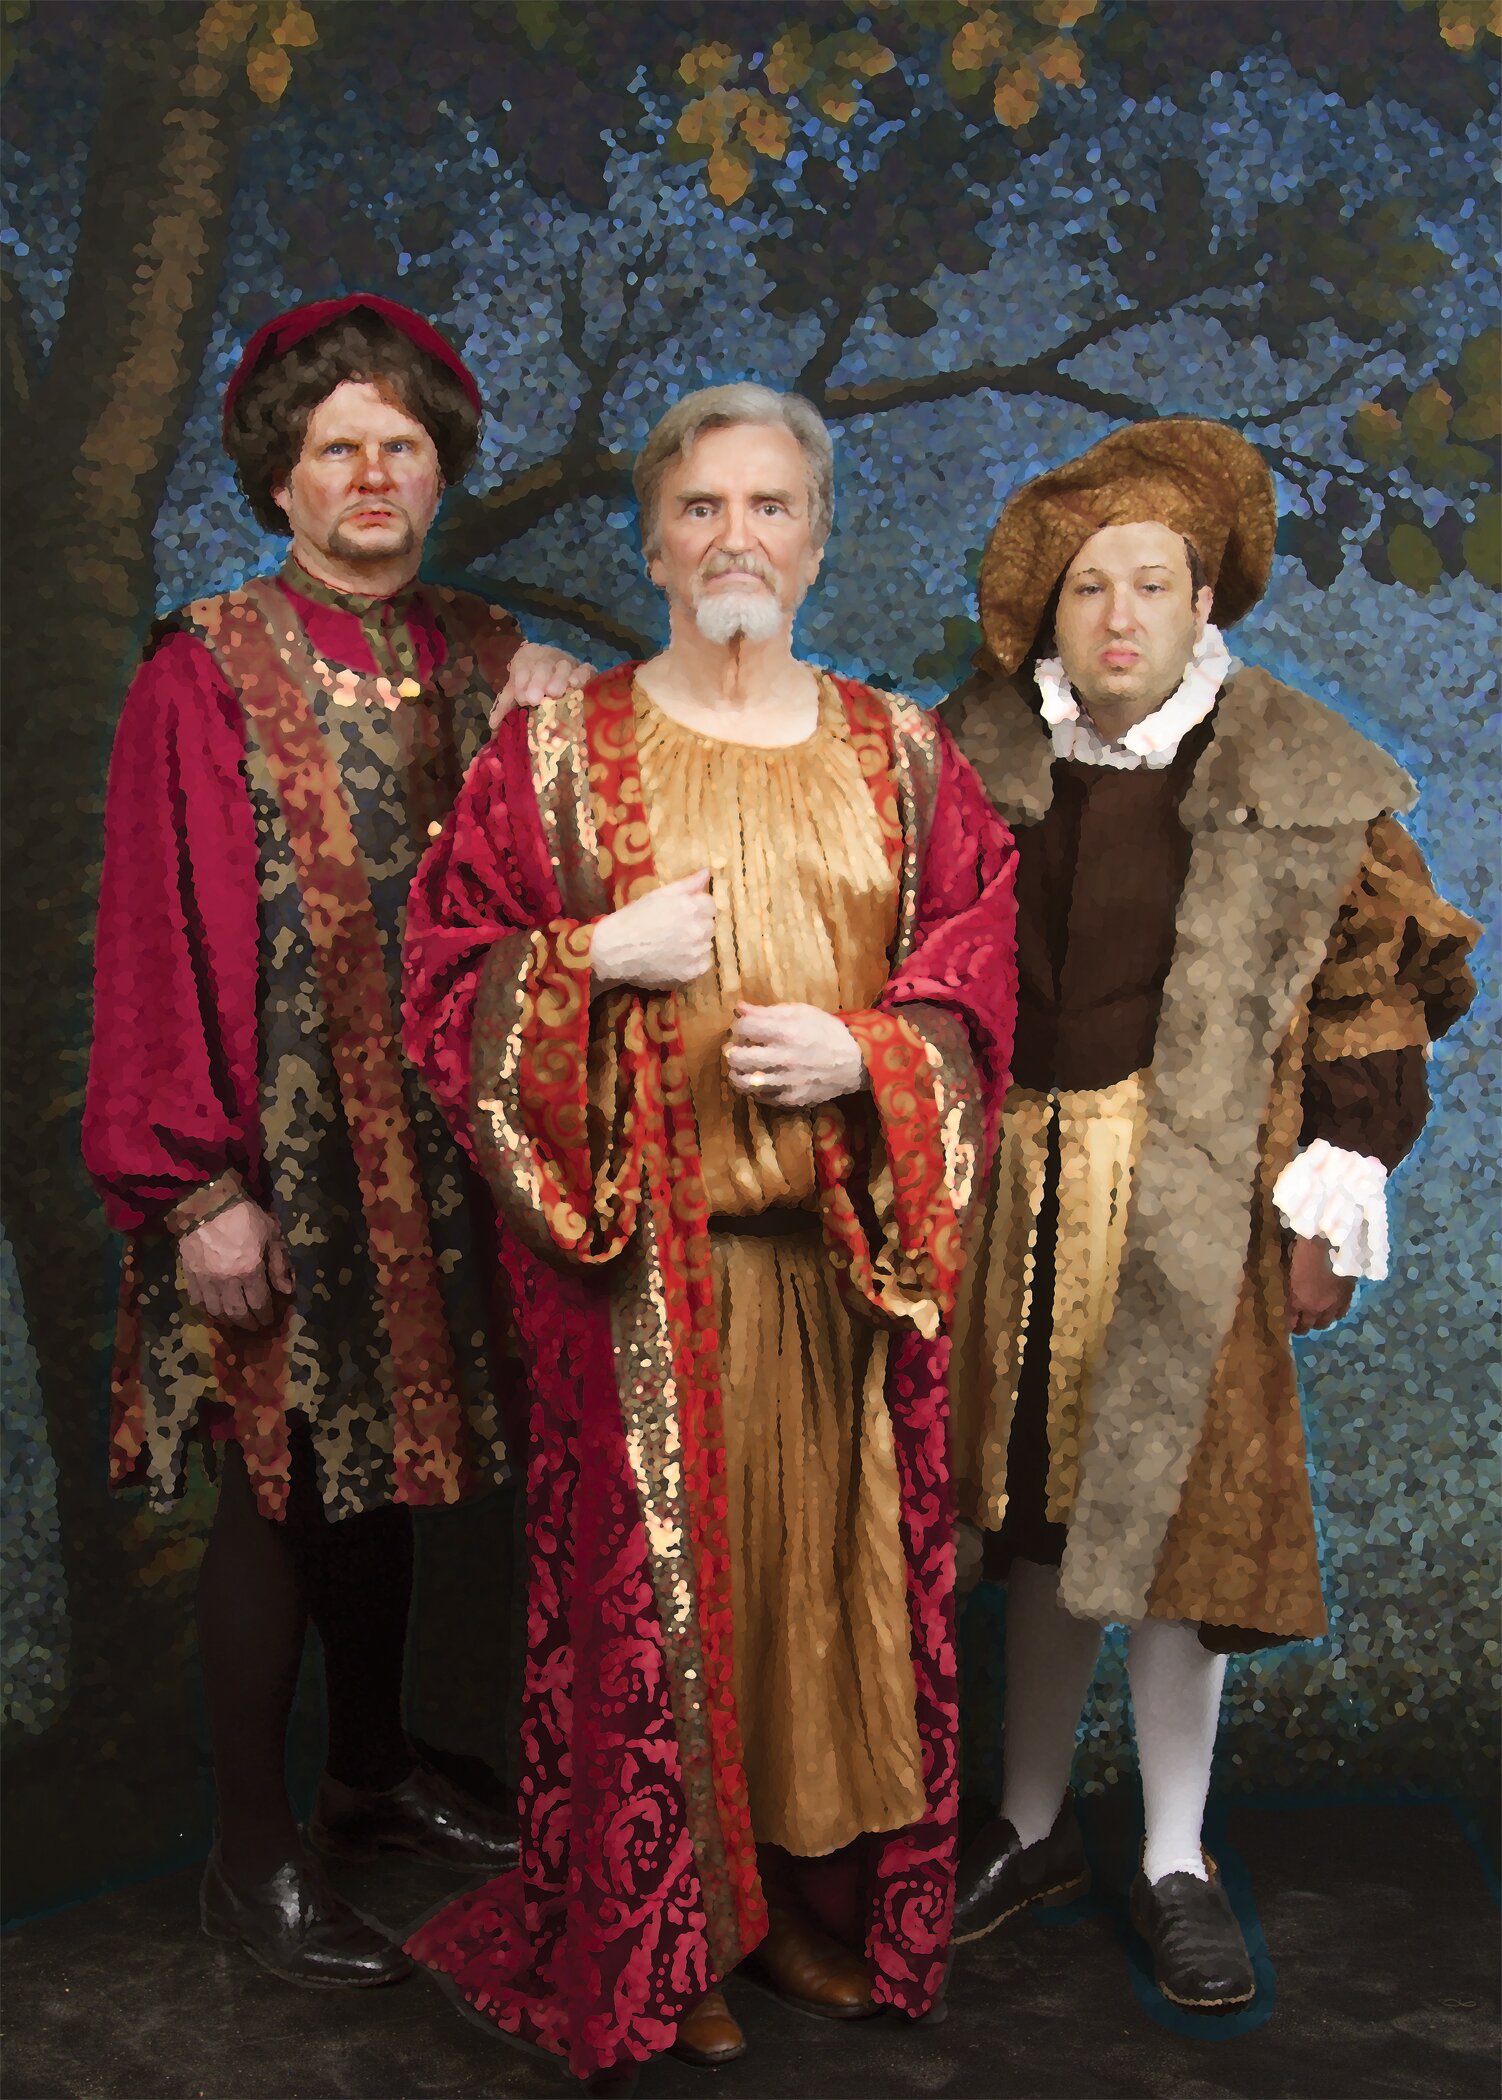 Chris Peterson, Michael Hulslander, and Jacob Rourke in Ruddigore (Photo: Patrick André)